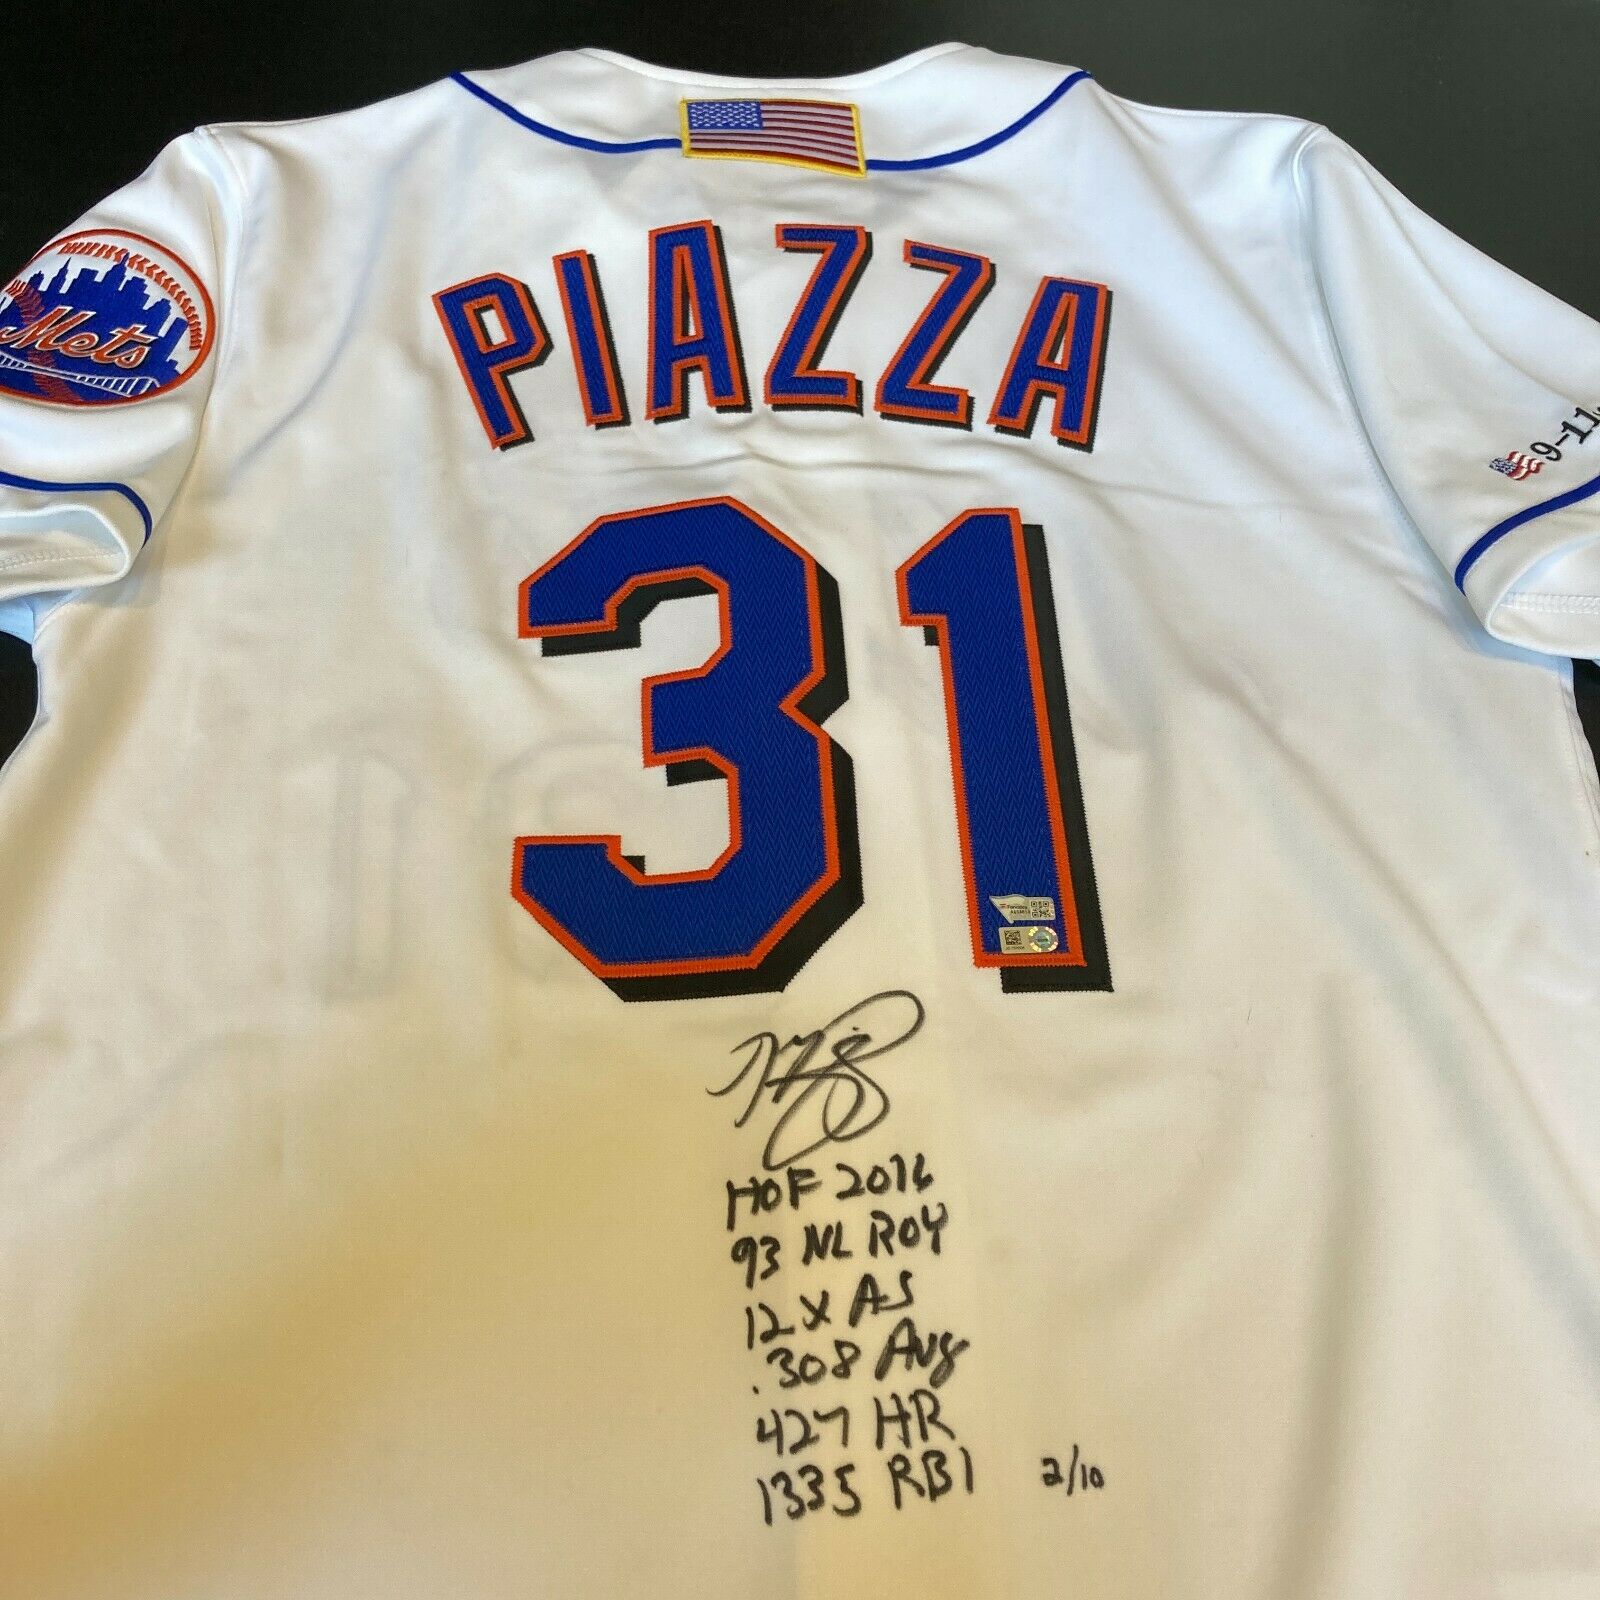 Mike Piazza New York Mets Autographed Mitchell and Ness White 2001